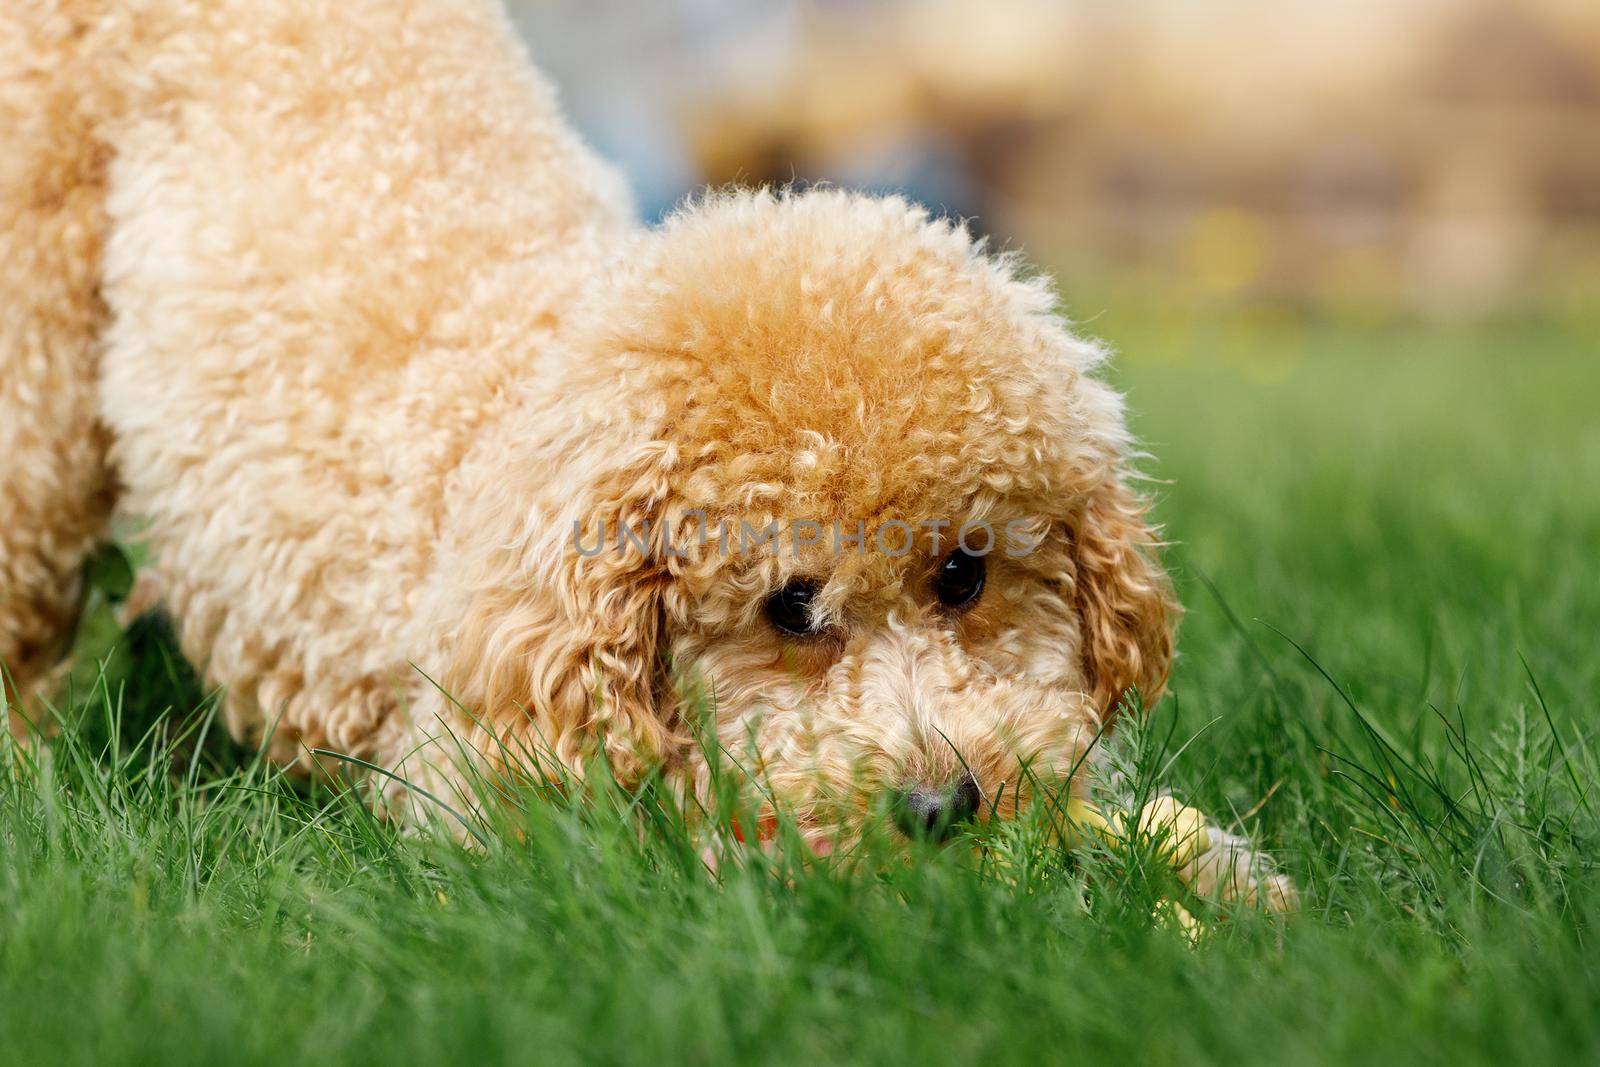 A cute puppy poodle is playing and hiding in the grass.